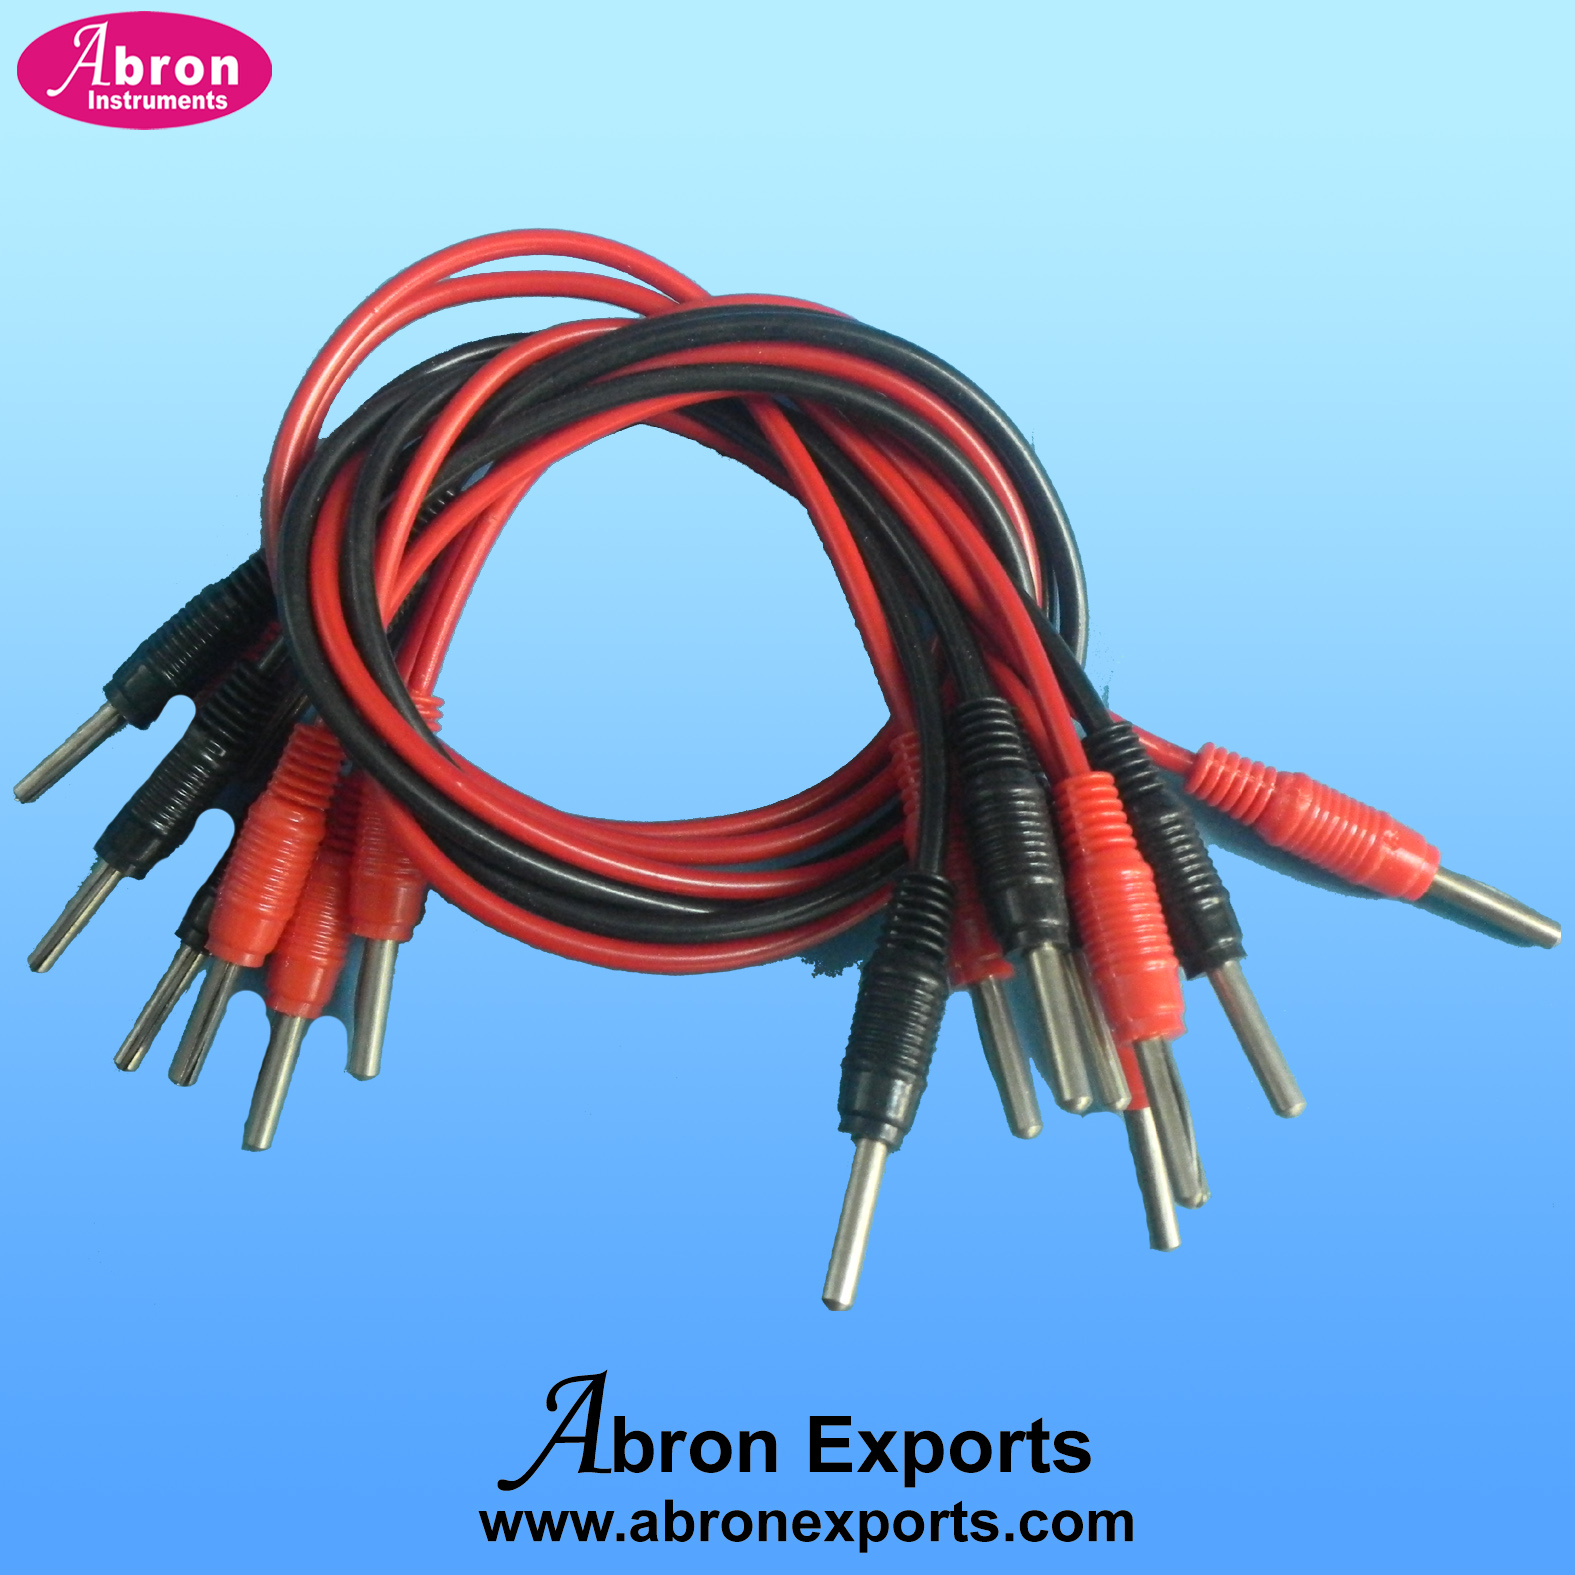 Connecting wire set of two or any one Red or Black banana plug AP-686W25  AE-1269W  Pack of 10x 2 color or one color AE-1269W 